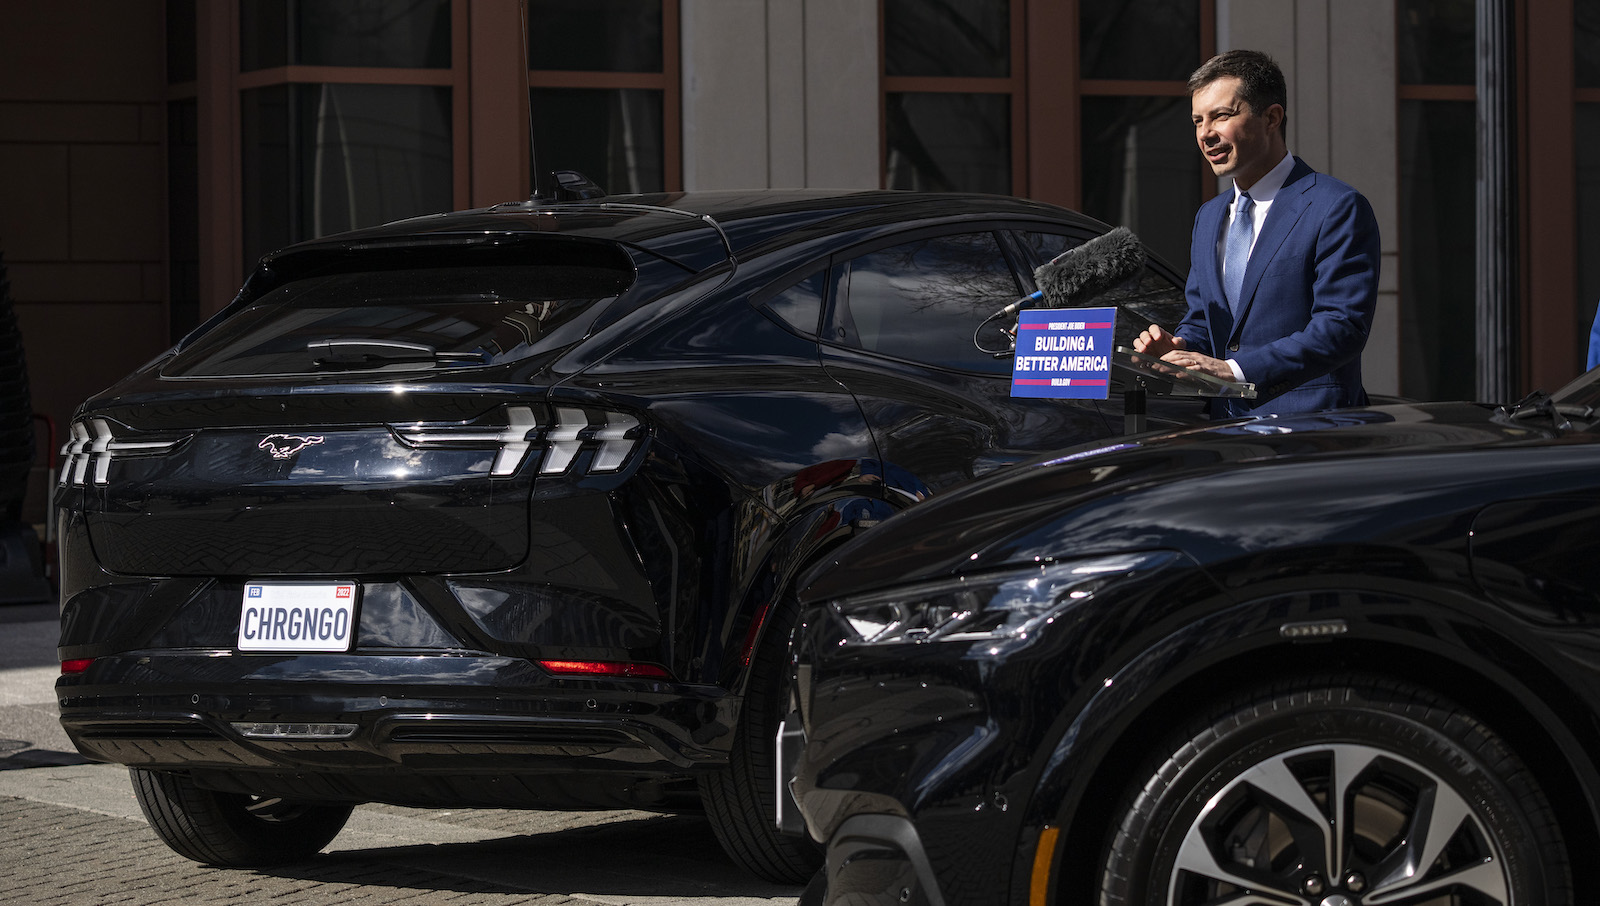 Pete Buttigieg stands between two black electric cars.